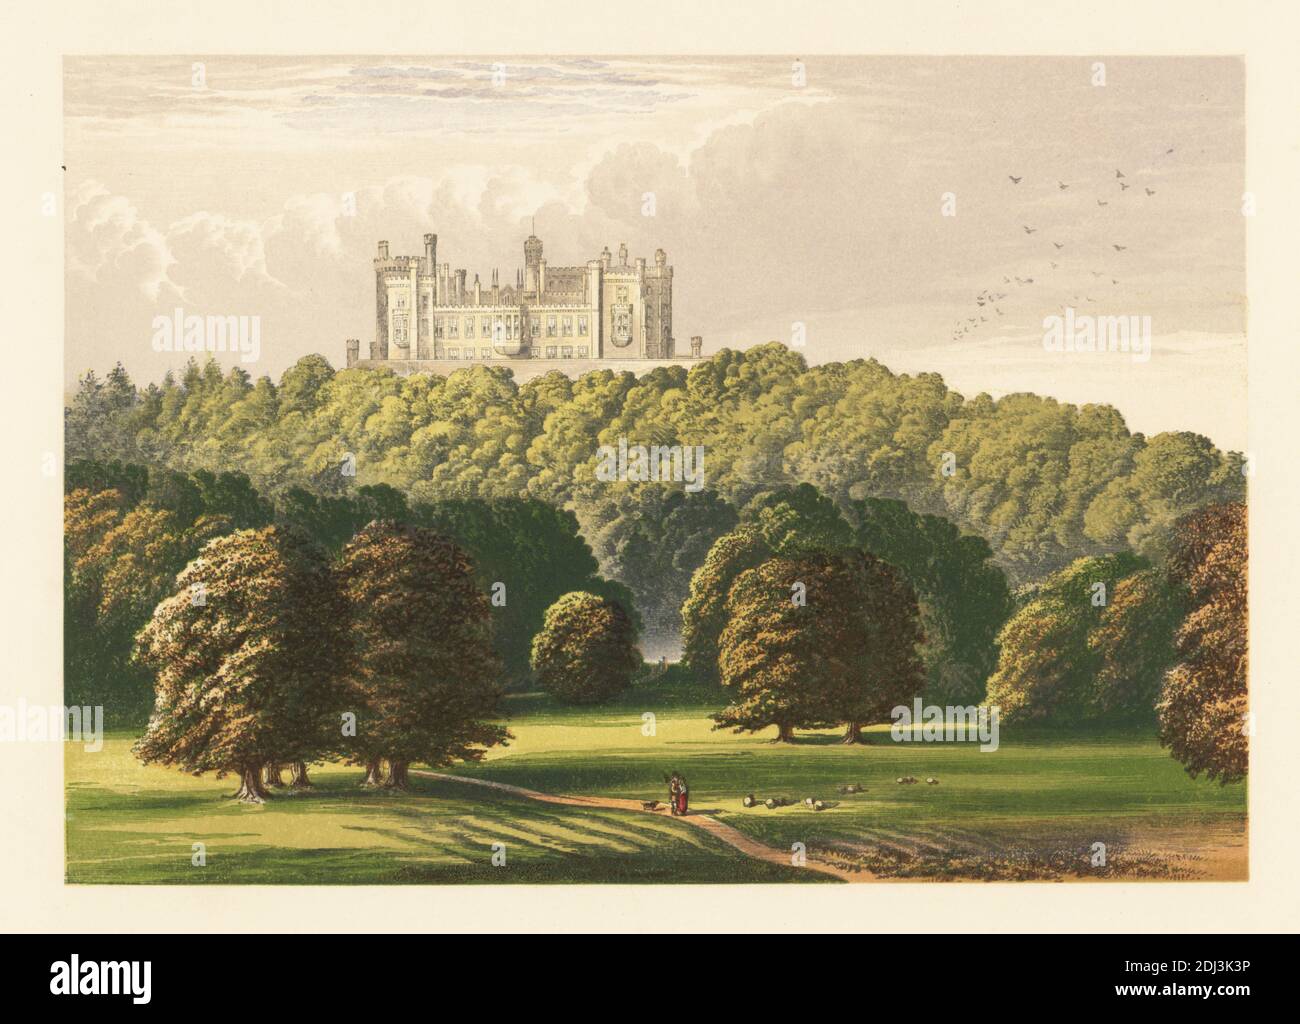 Belvoir Castle, Leicestershire, England. Norman castle rebuilt in the early 19th century by James Wyatt in the Gothic-Revival style for John Henry Manners, 5th Duke of Rutland. Gardens landscaped by Capability Brown and Elizabeth Howard. Colour woodblock by Benjamin Fawcett in the Baxter process of an illustration by Alexander Francis Lydon from Reverend Francis Orpen Morris’s Picturesque Views of the Seats of Noblemen and Gentlemen of Great Britain and Ireland, William Mackenzie, London, 1880. Stock Photo